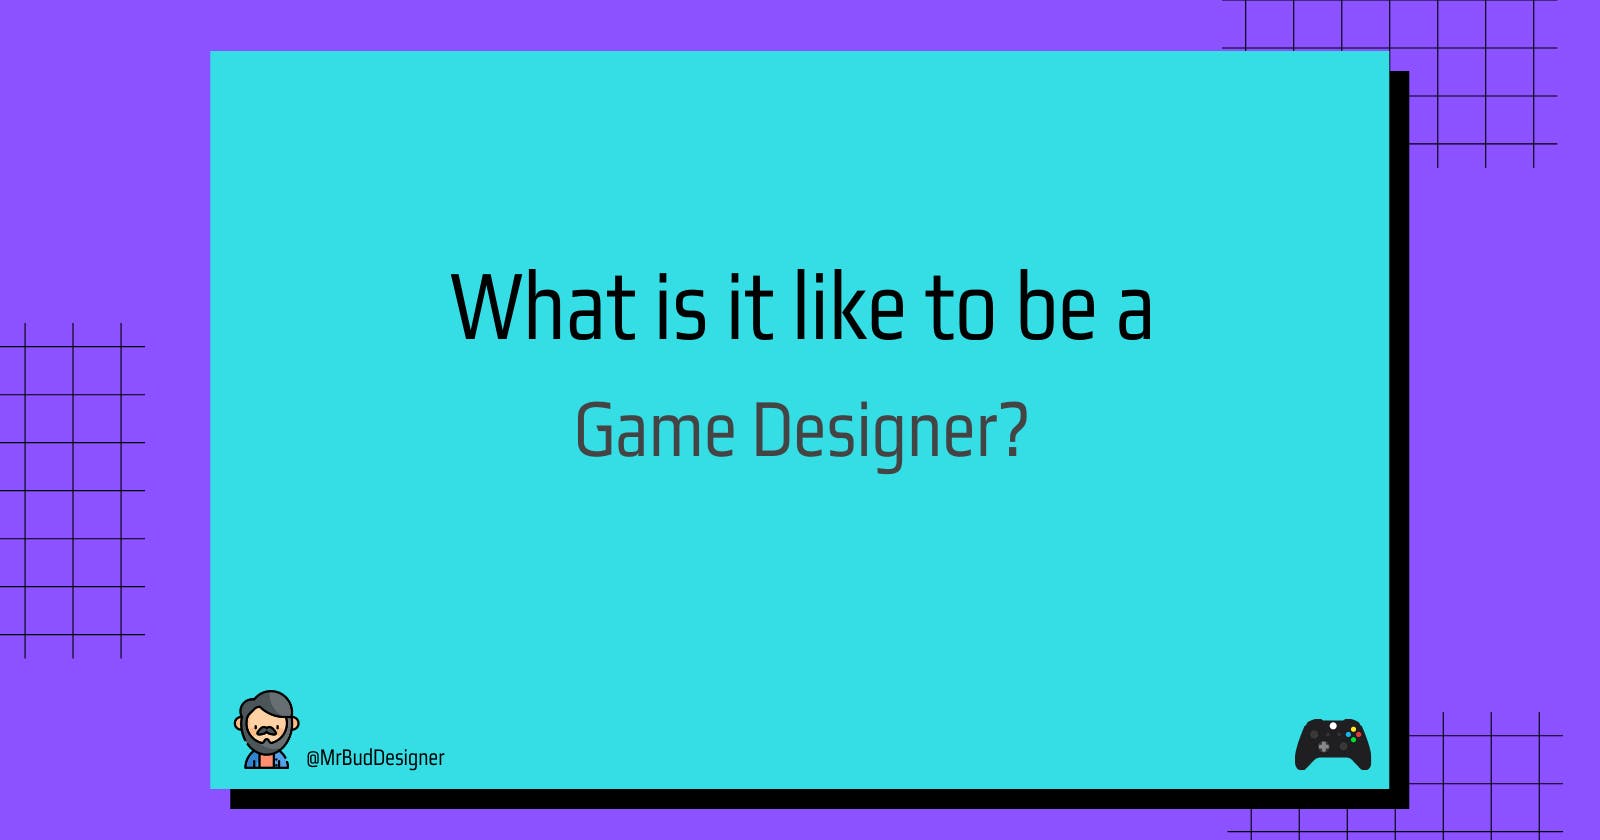 What is it like to be a Game Designer?